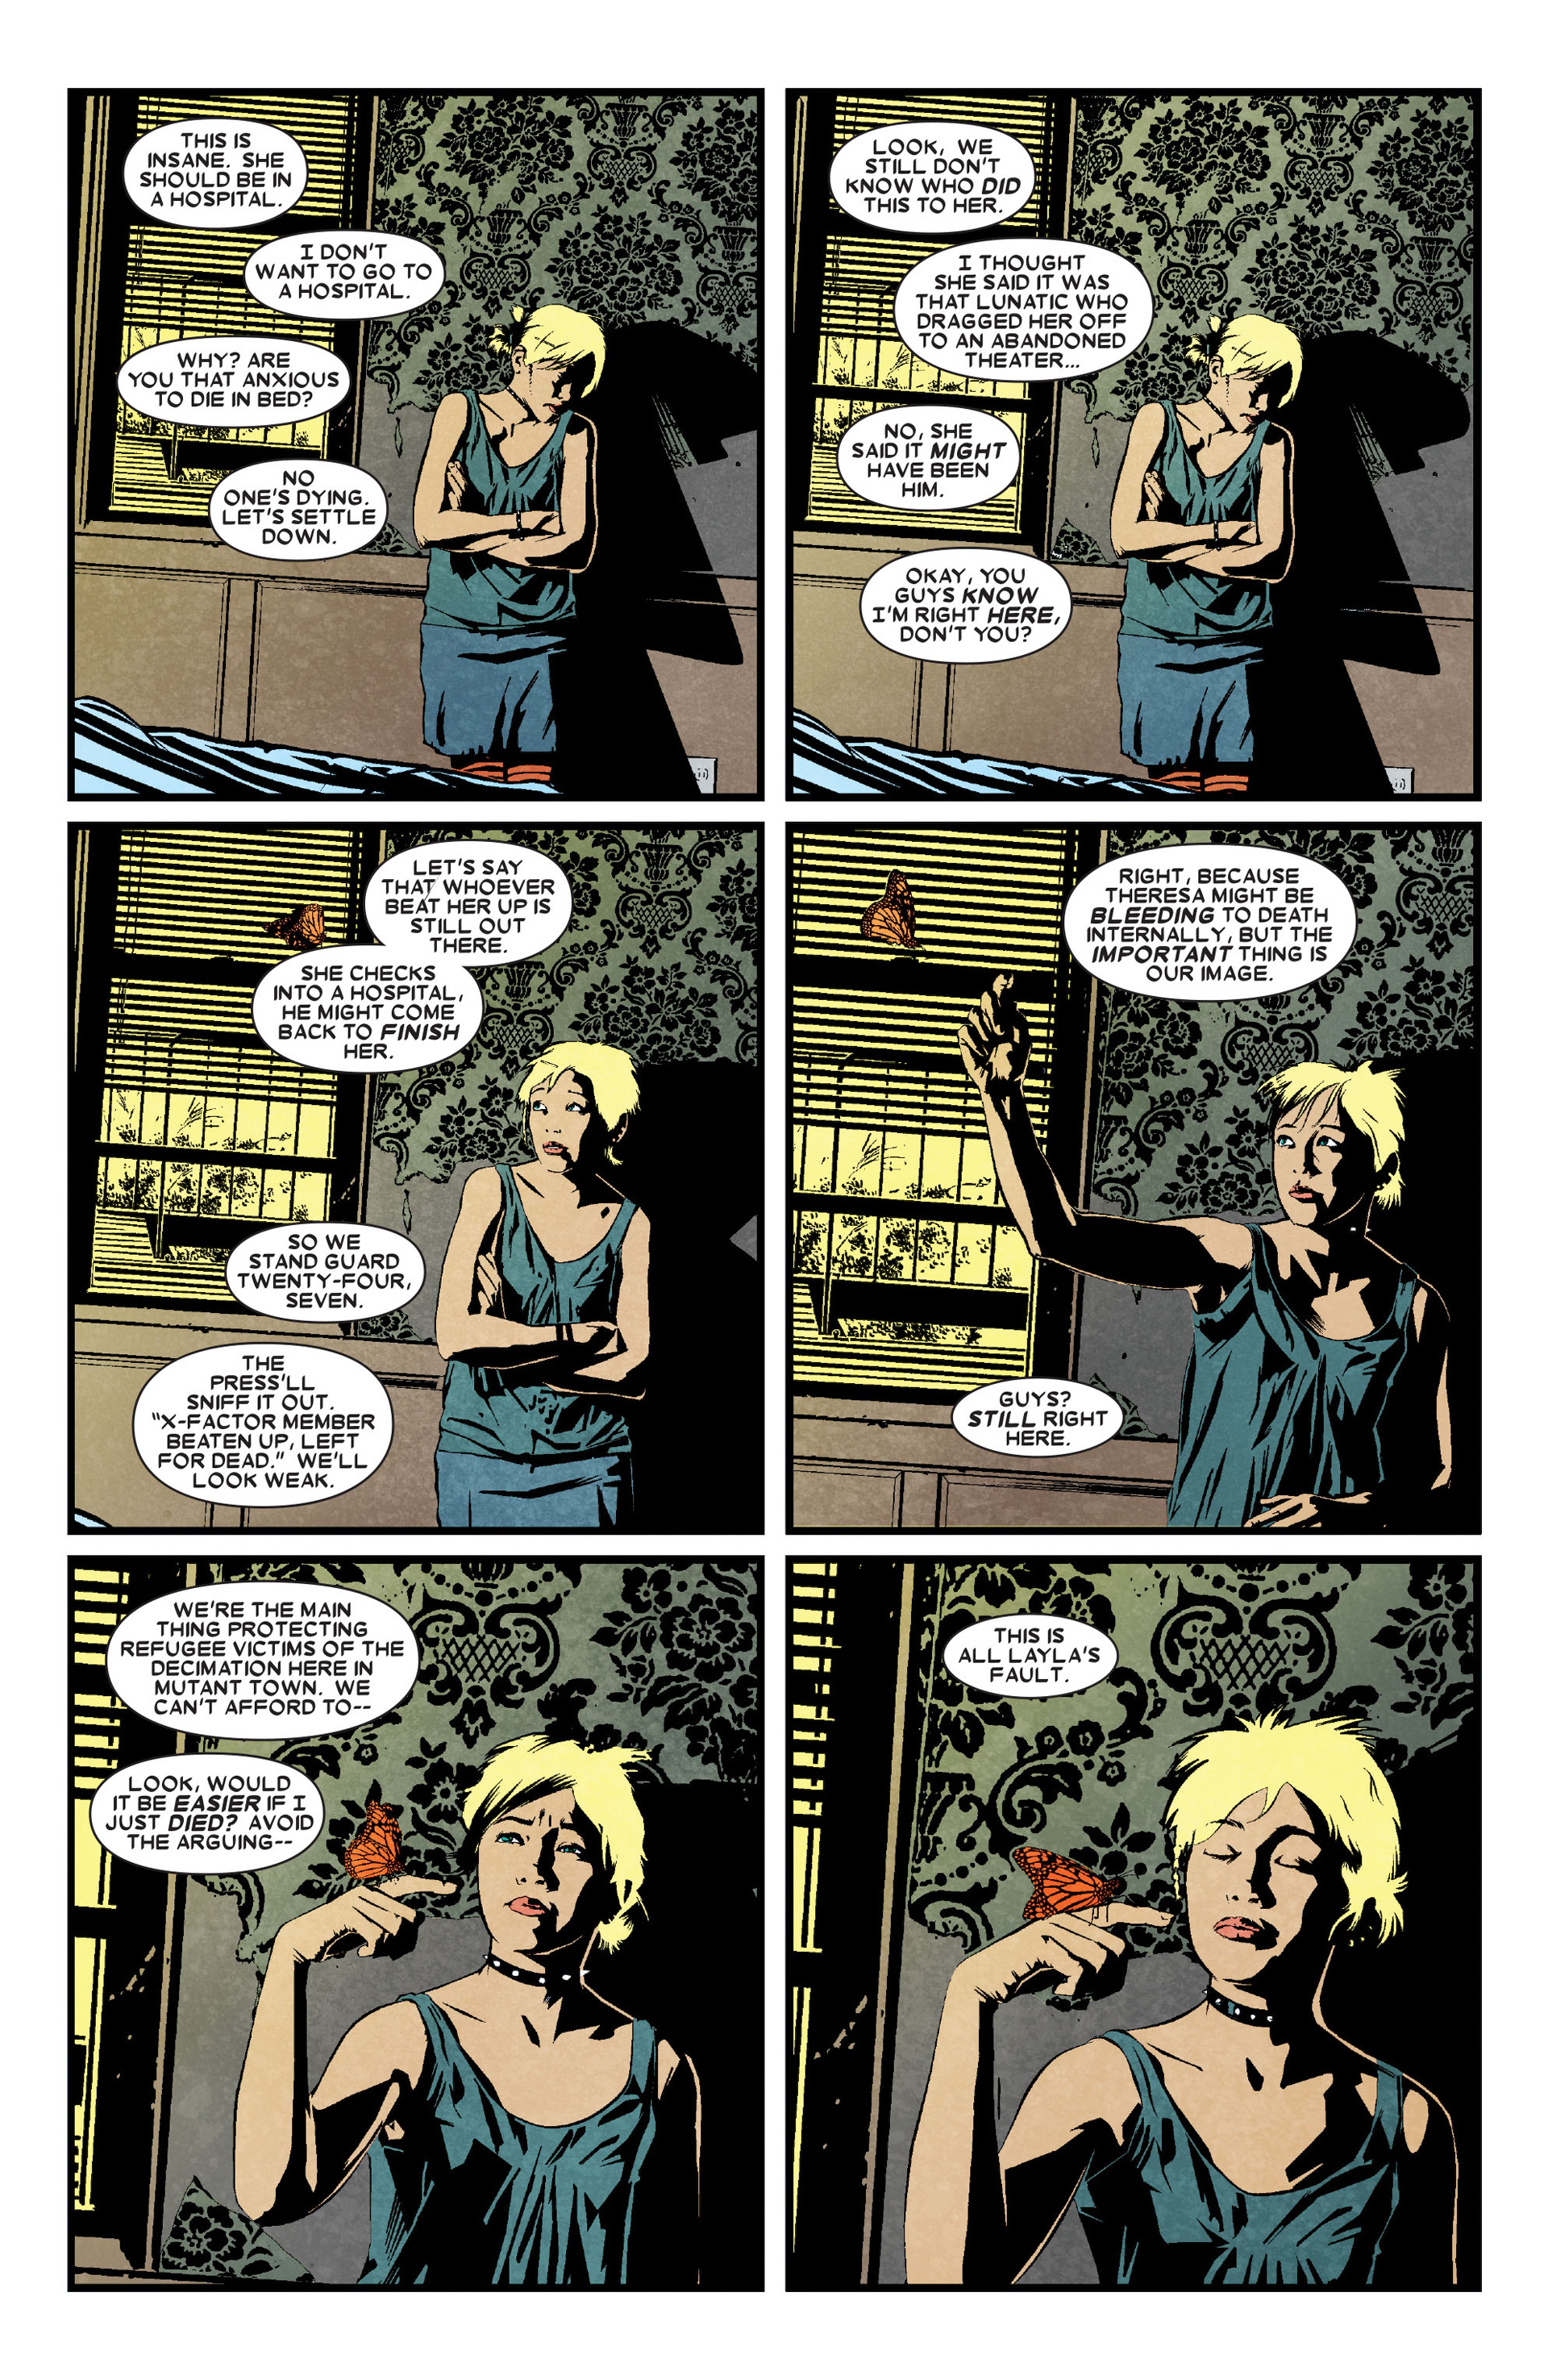 X-Factor (2006) 6 Page 2